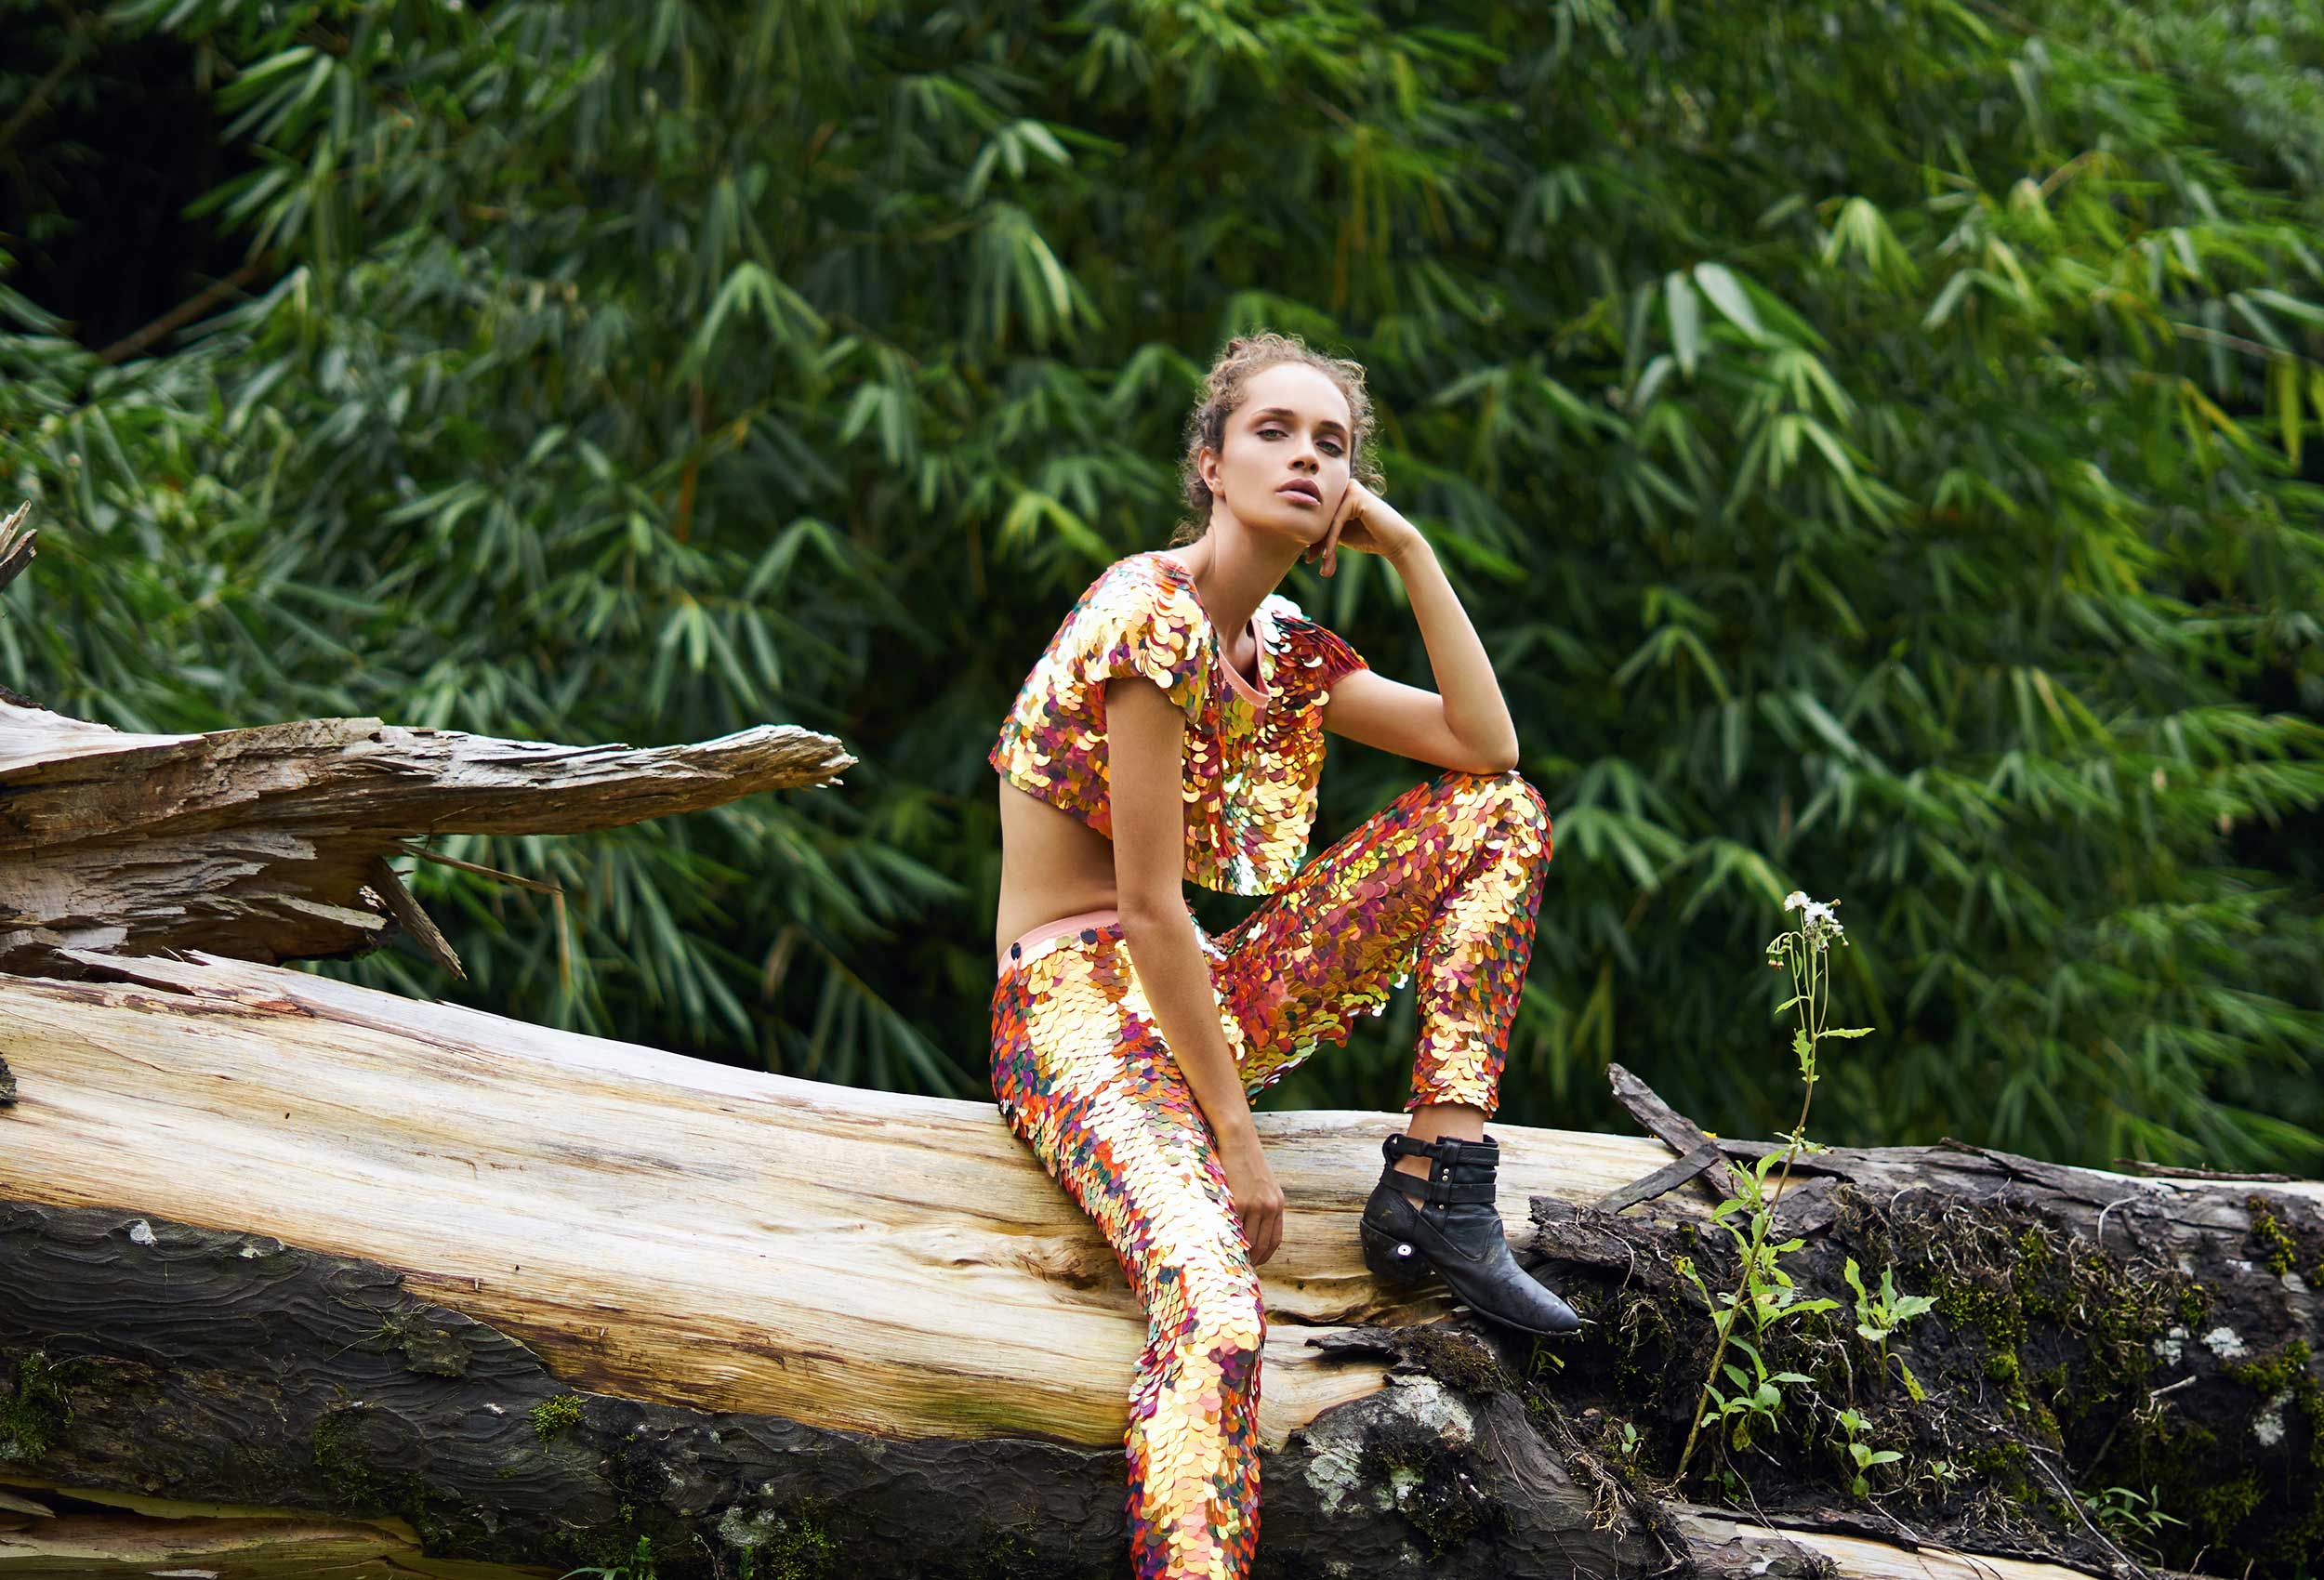 woman in leggings and a cropped t-shirt covered in large red iridescent sequins sitting on a large fallen tree